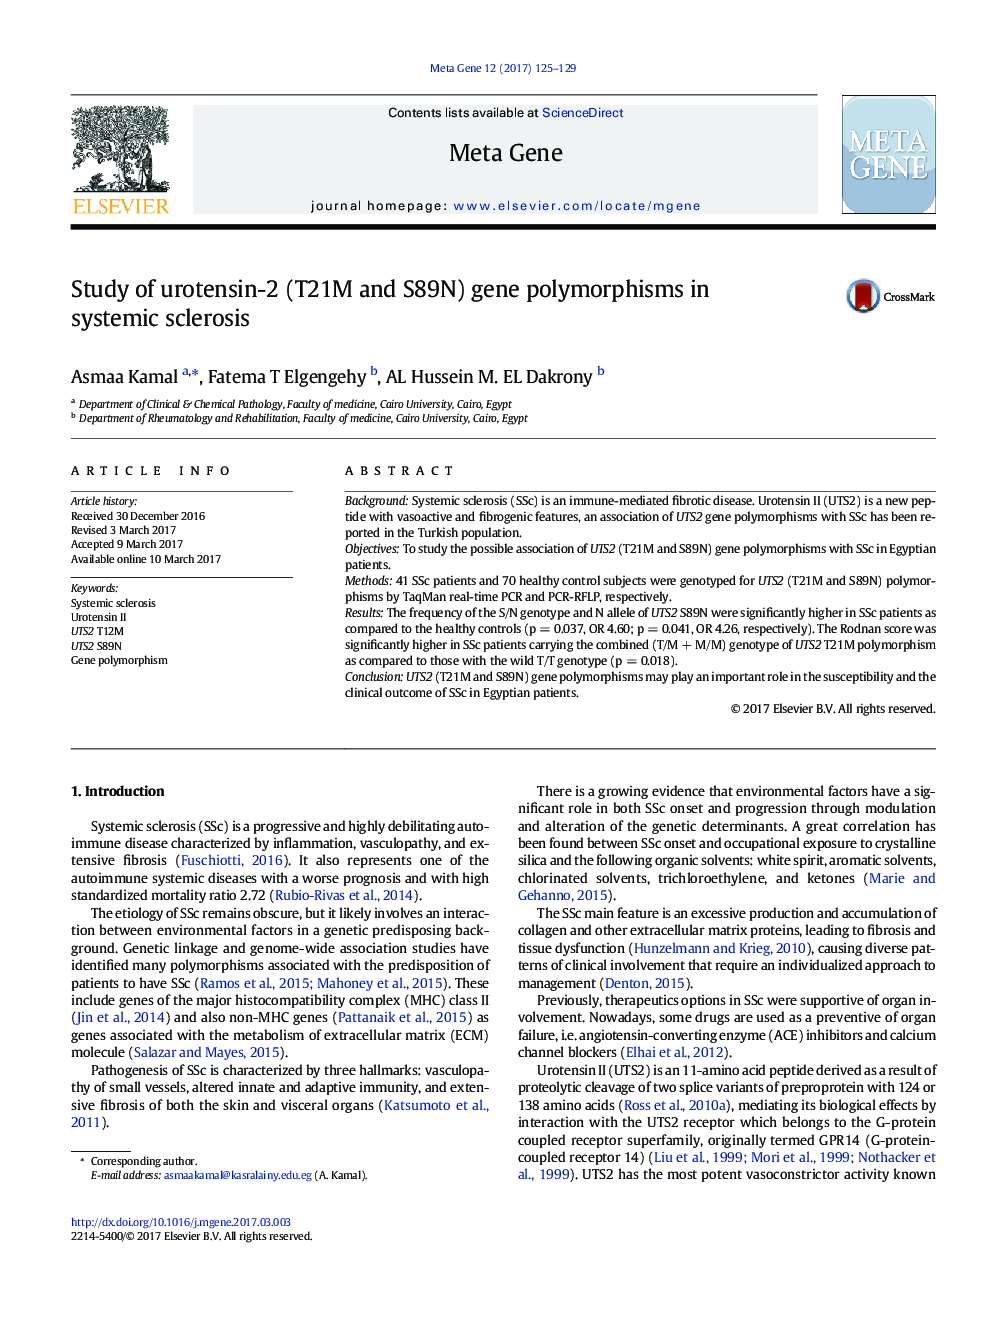 Study of urotensin-2 (T21M and S89N) gene polymorphisms in systemic sclerosis